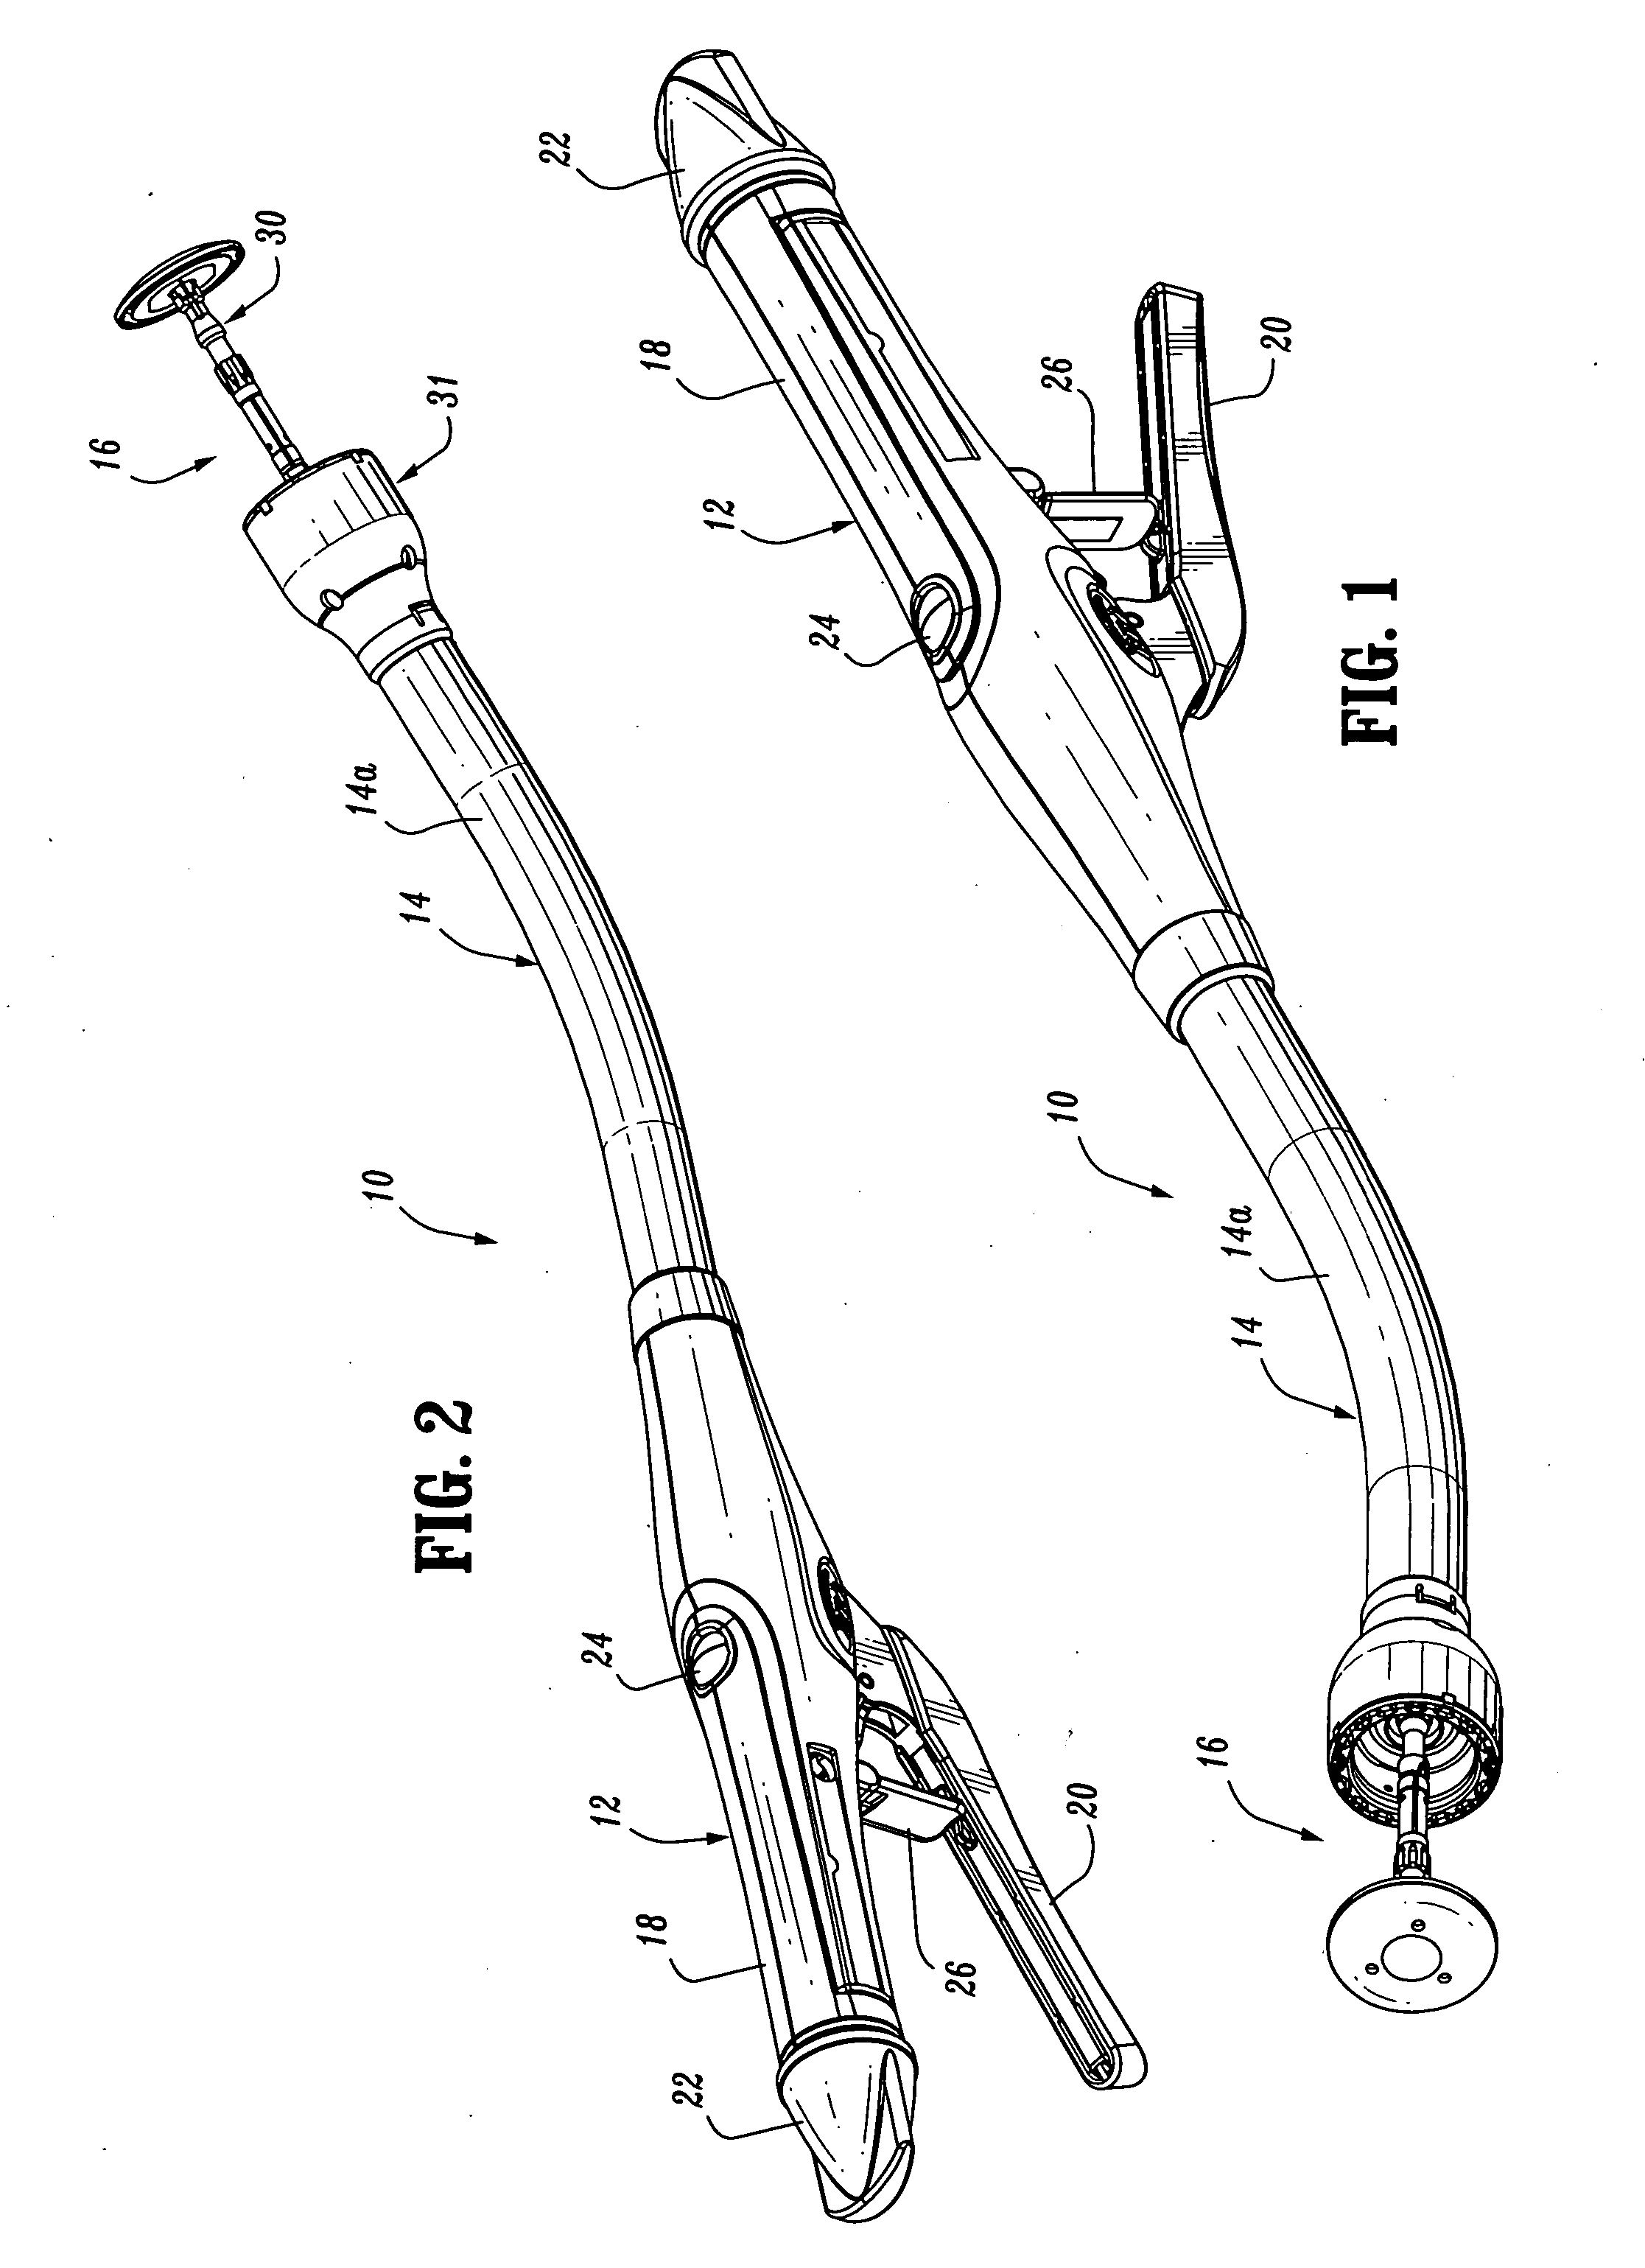 Surgical stapling device